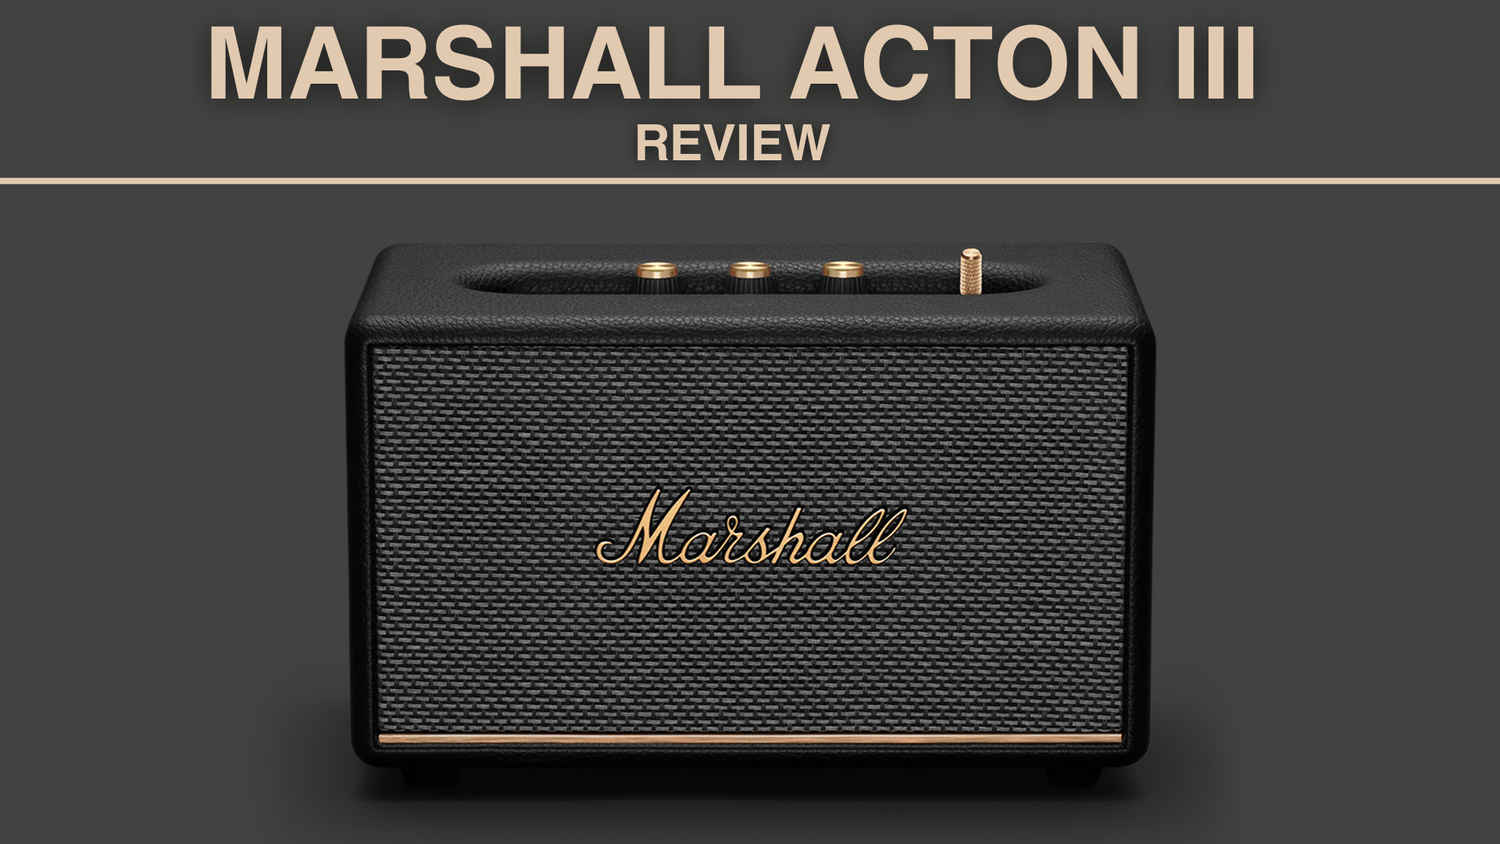 Marshall Acton III review- The definition of luxury listening experience